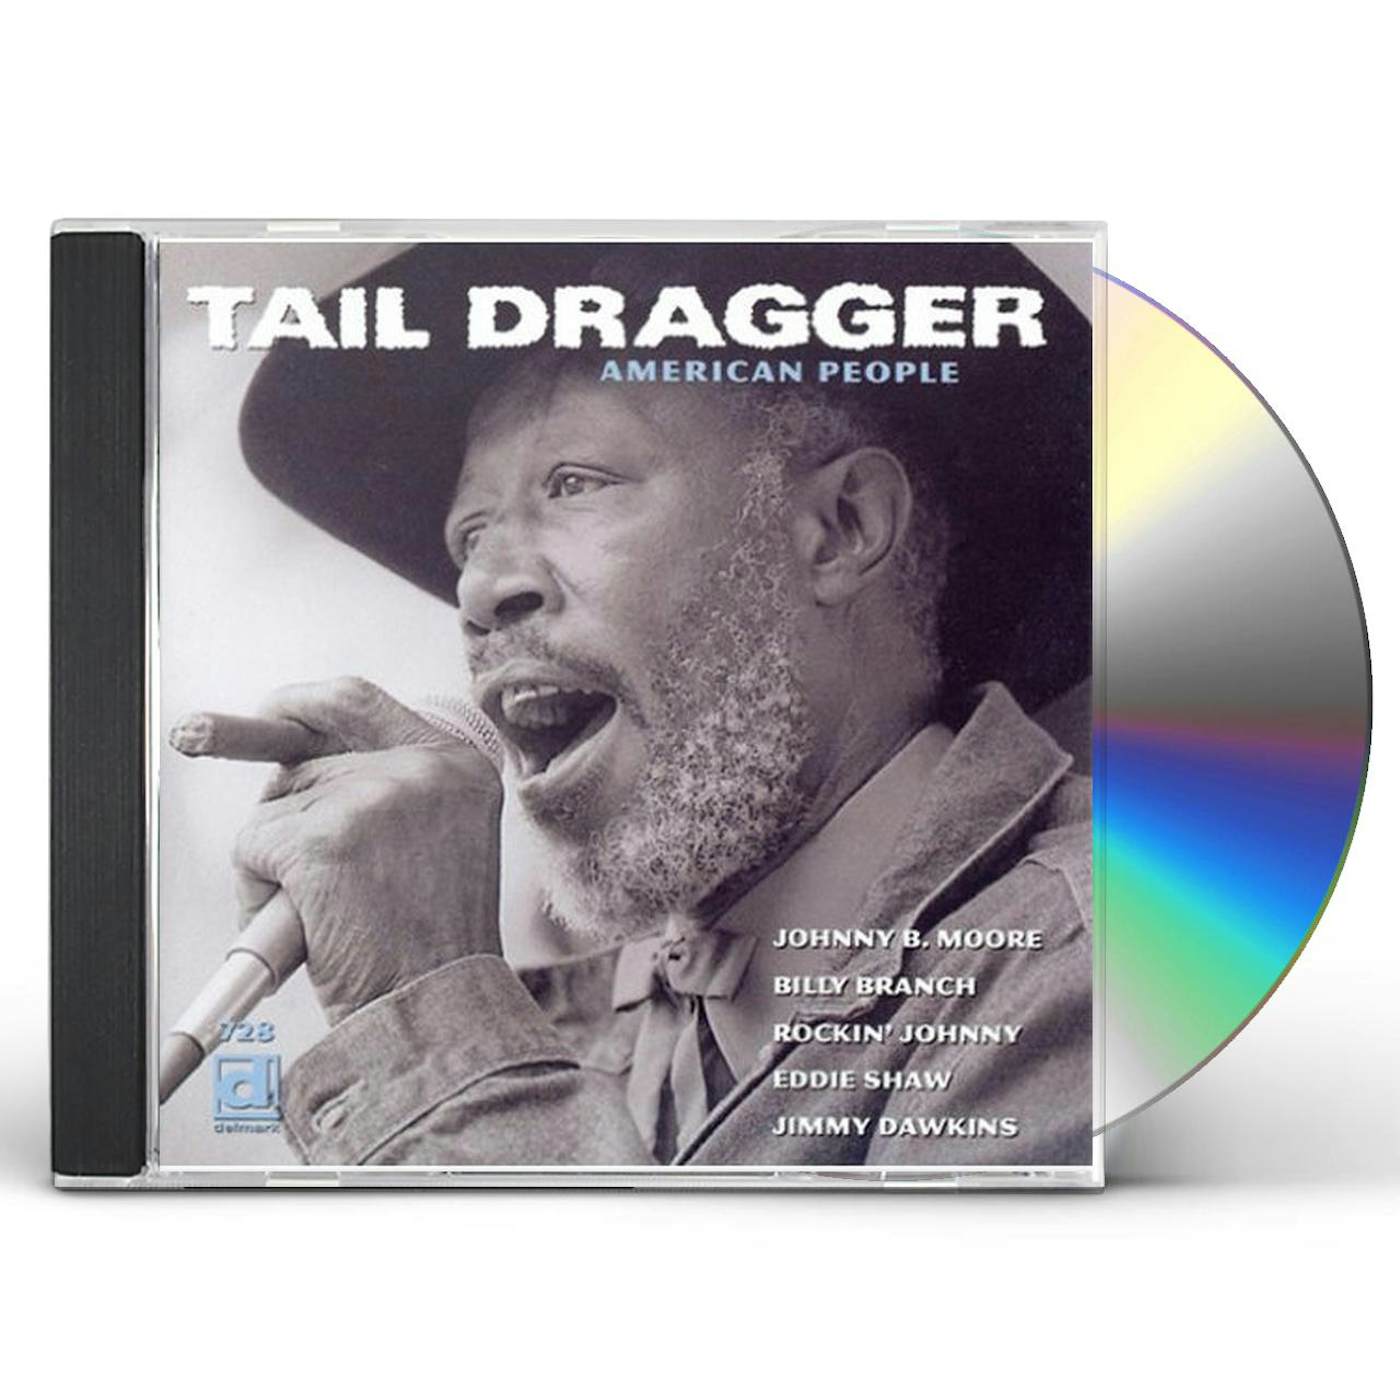 Tail Dragger AMERICAN PEOPLE CD